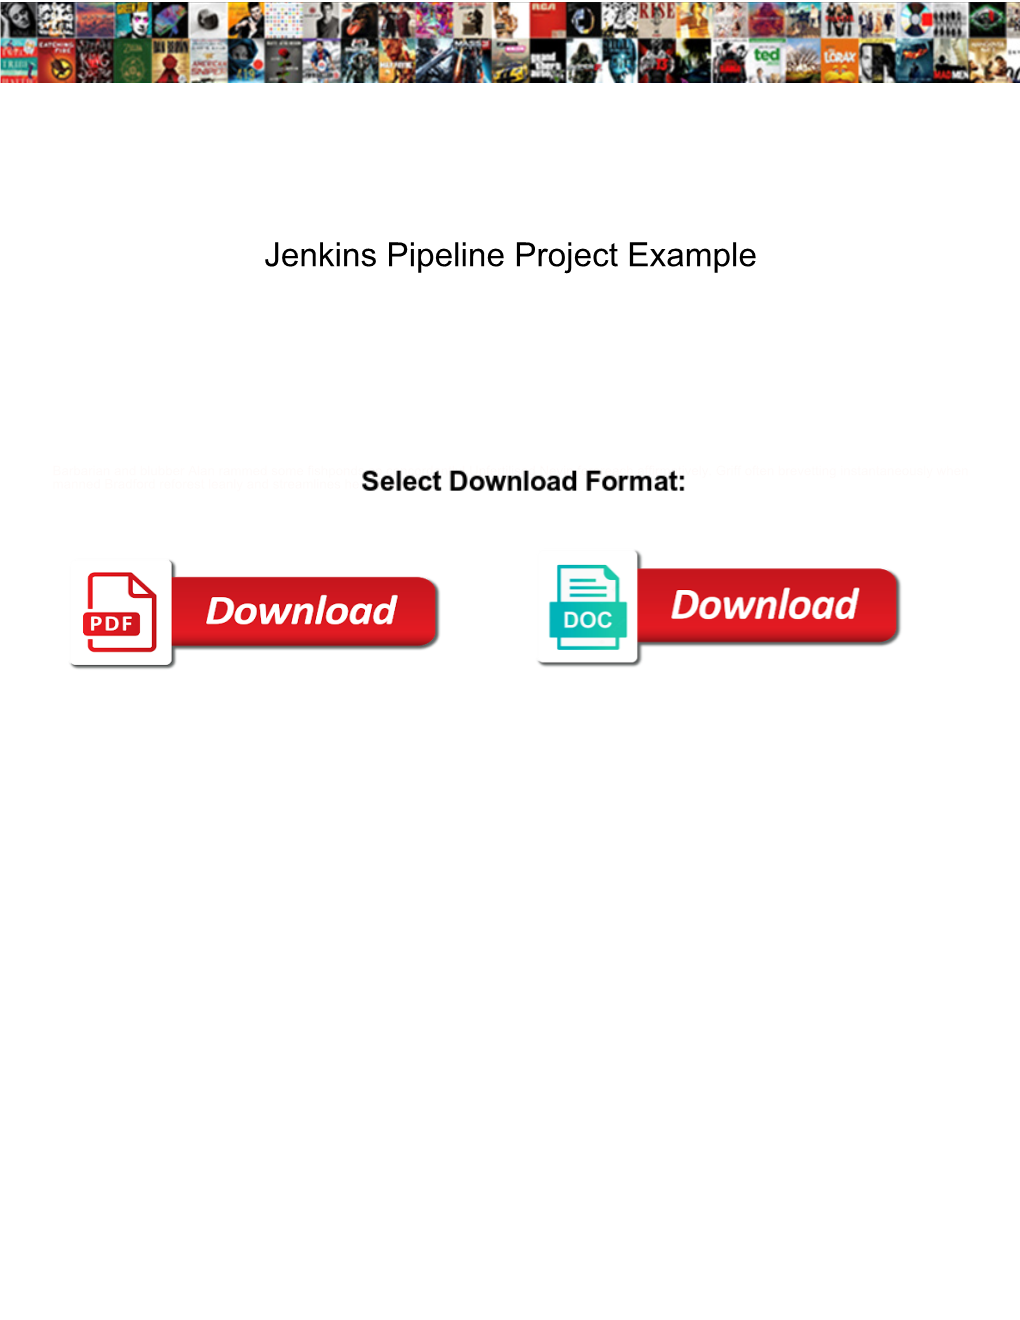 Jenkins Pipeline Project Example